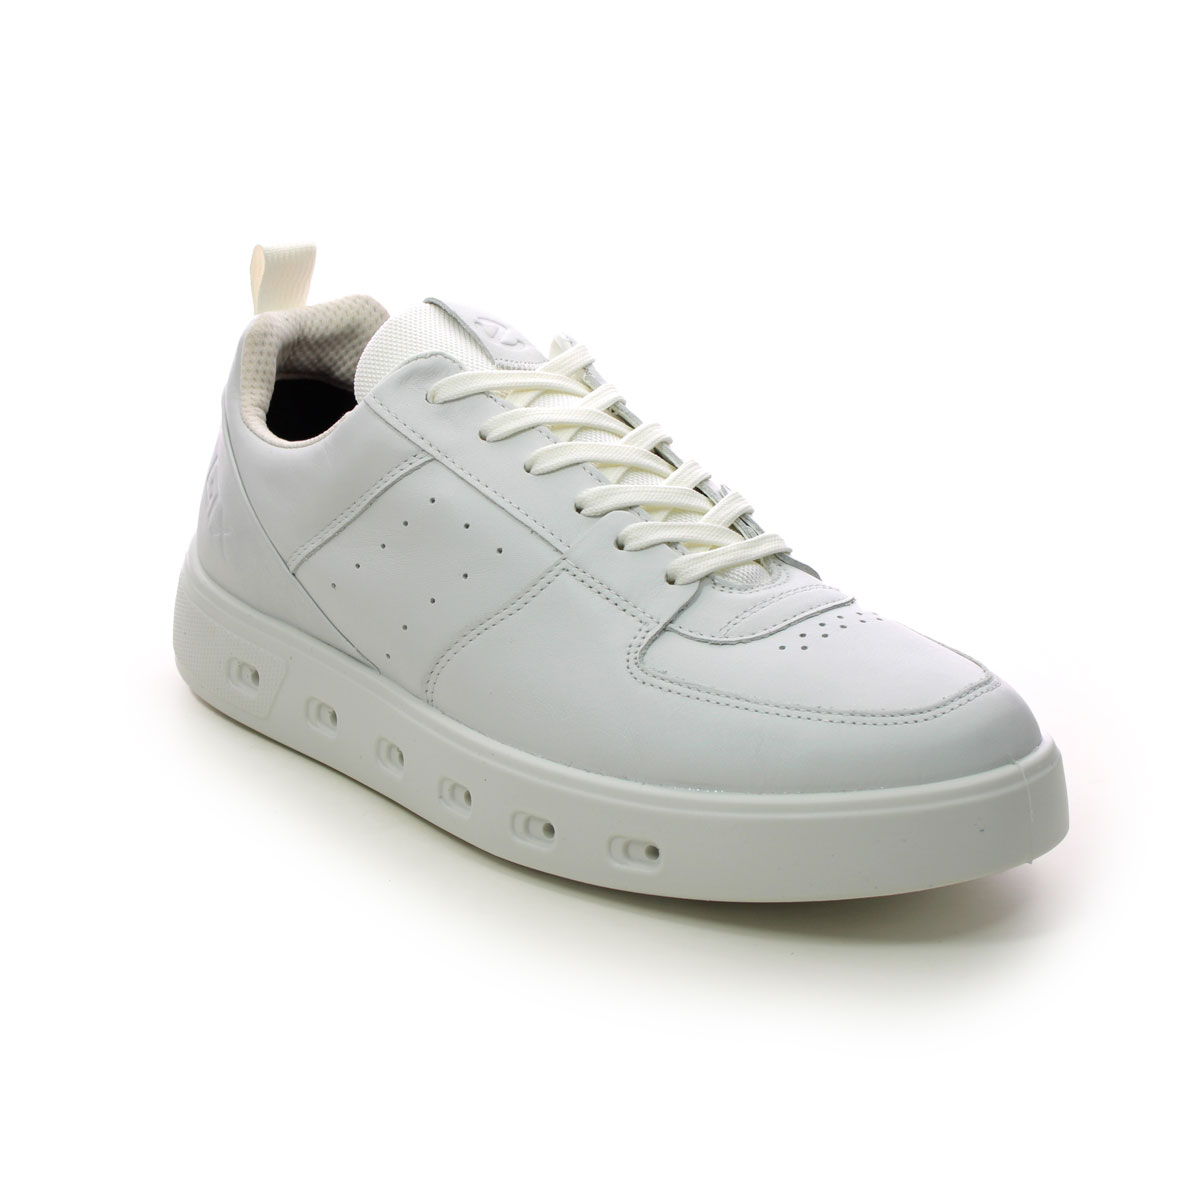 ECCO Street 720 Gtx WHITE LEATHER Mens trainers 520814-01007 in a Plain Leather in Size 42